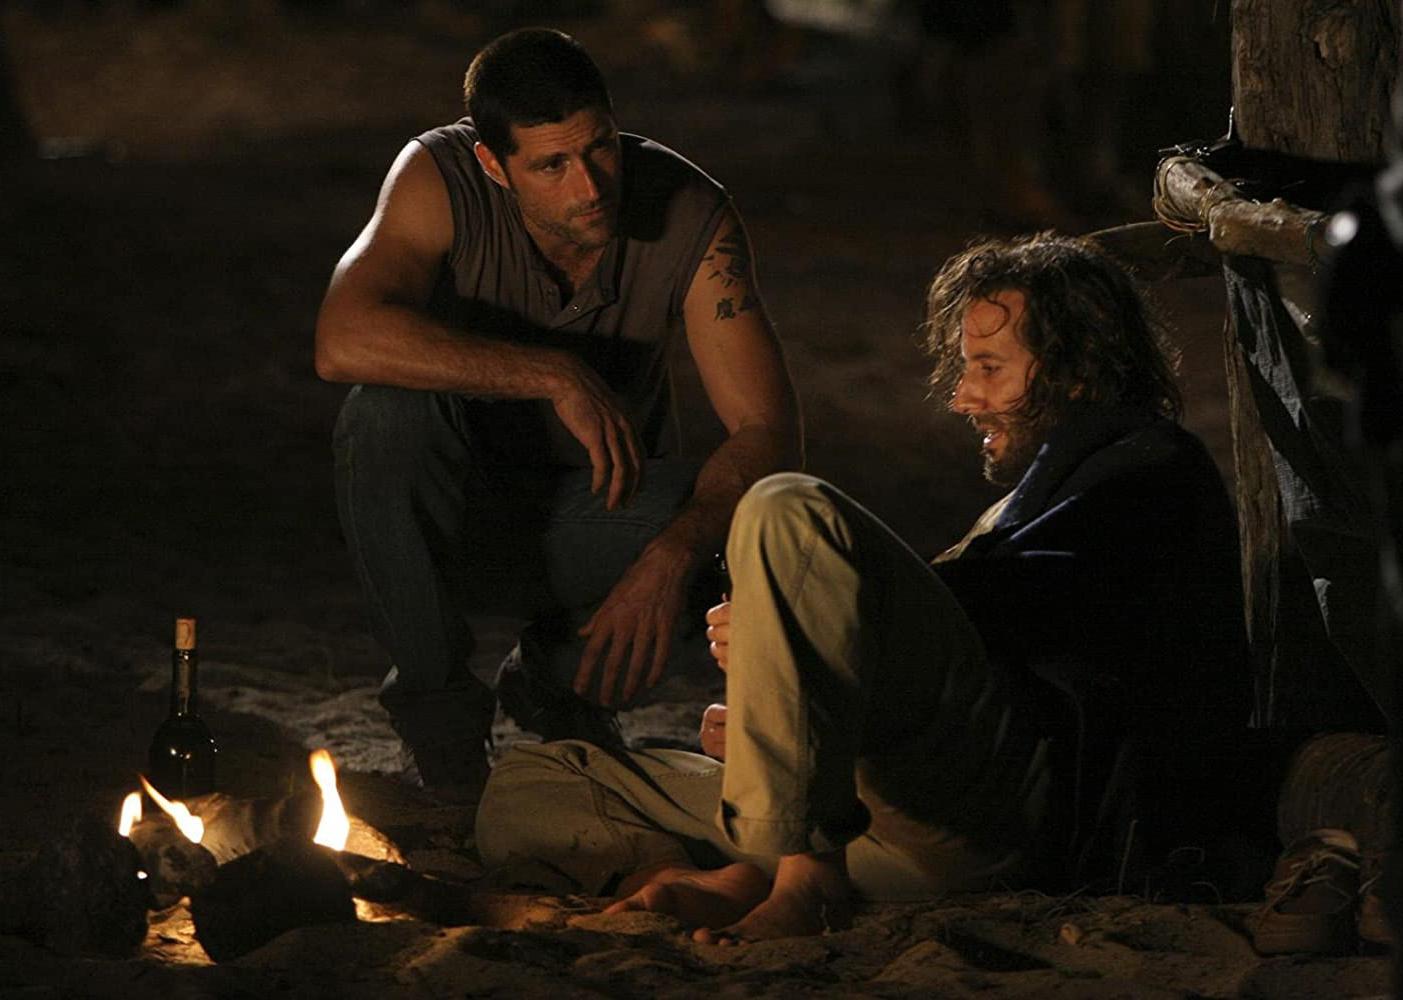 Matthew Fox and another man sit by a campfire at night.